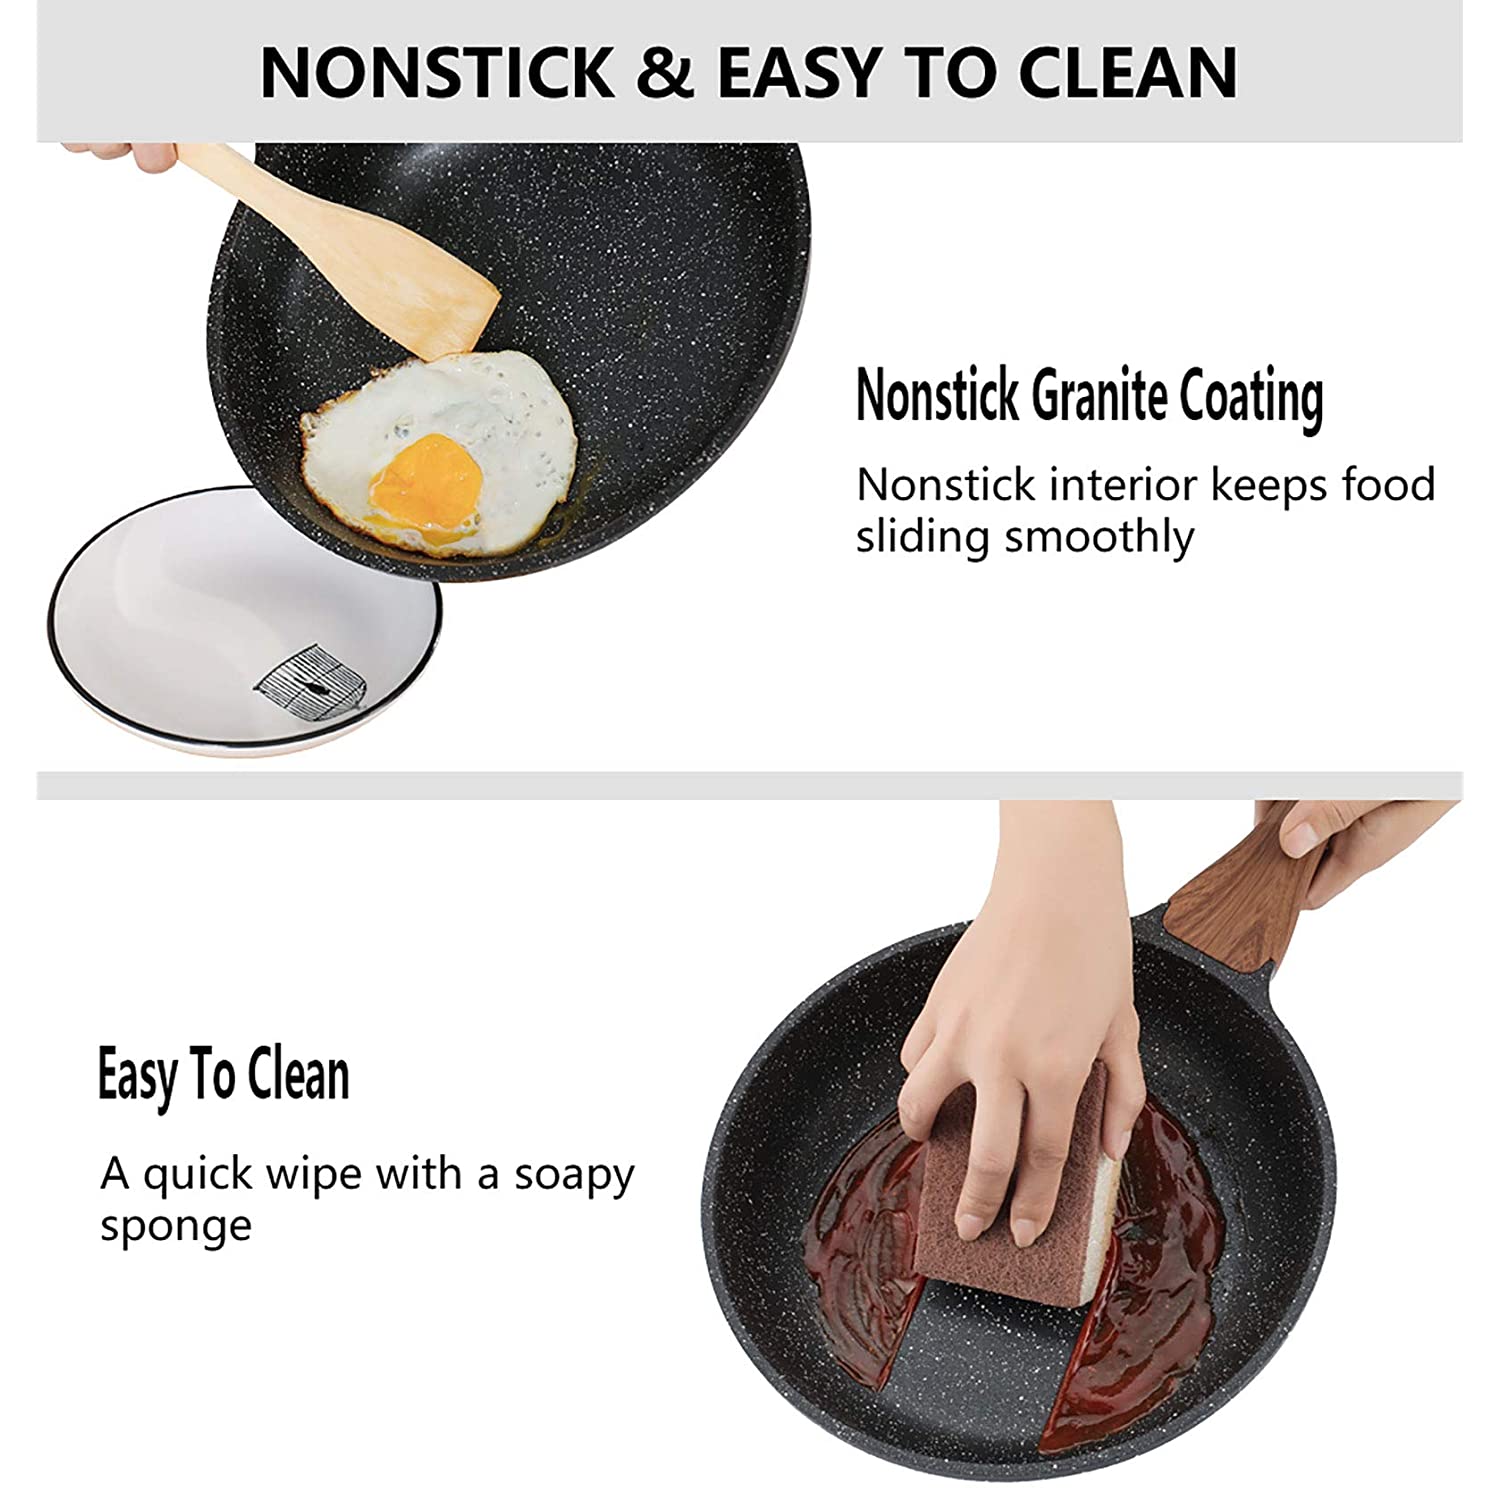 ESLITE LIFE 9.5 Inch Nonstick Grill Pan for Stove Tops Induction